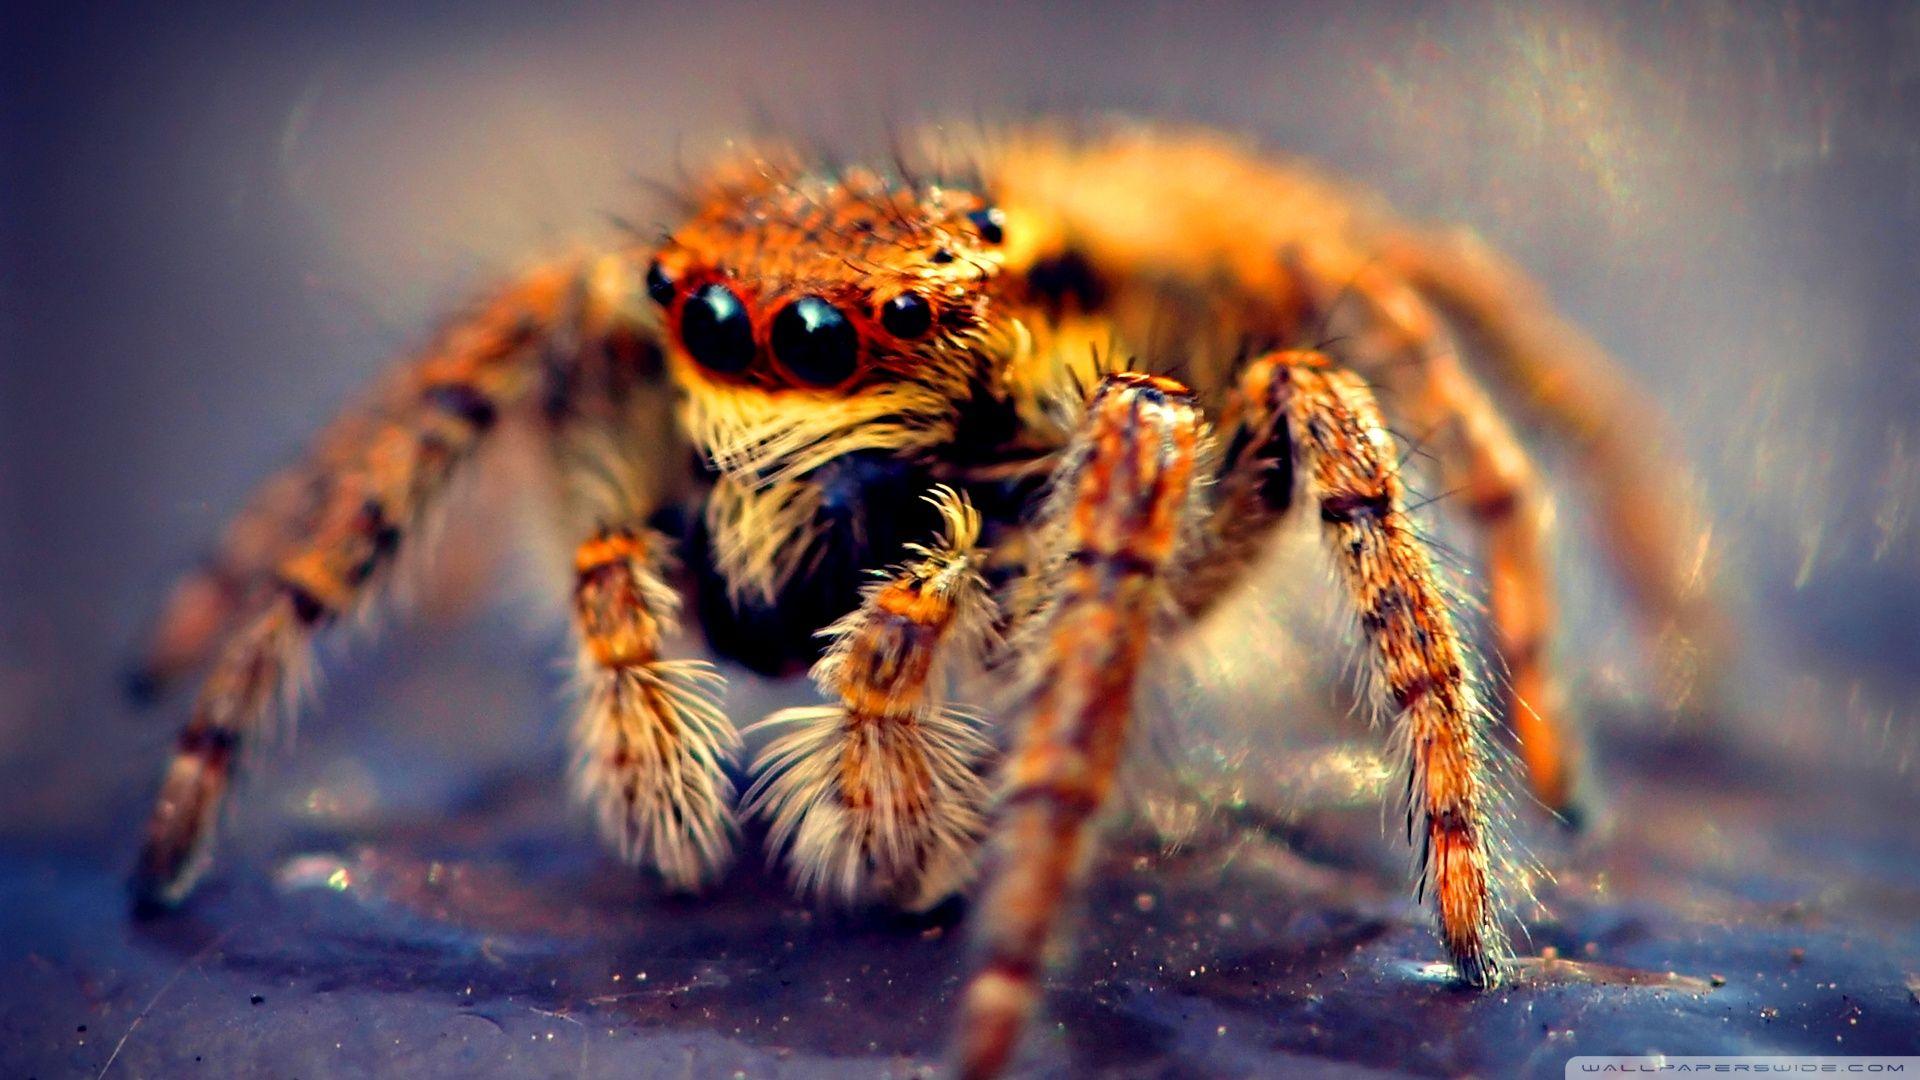 Spider Wallpaper For iPhone #u5t. Animals. Spider, Jumping